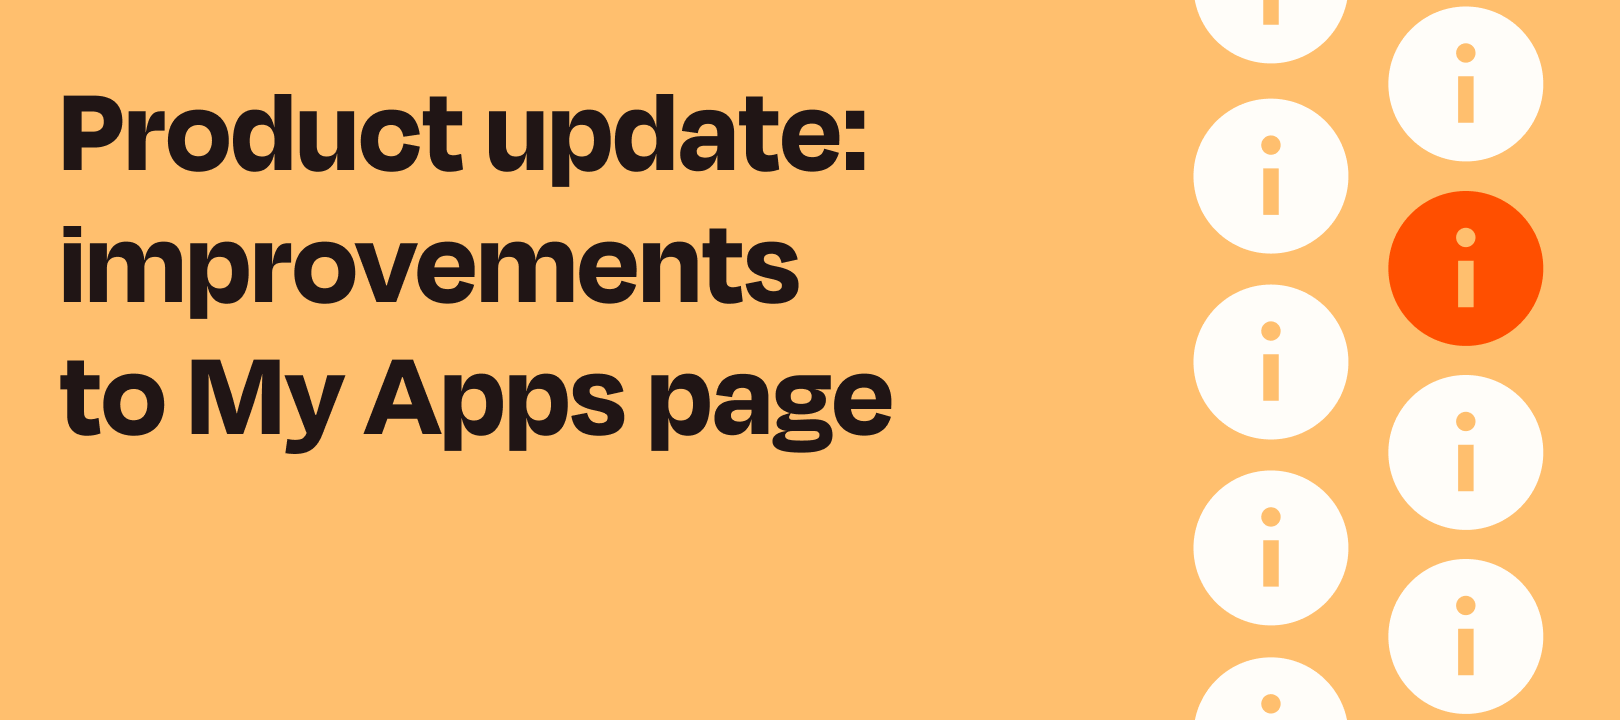 8 improvements we've made to your My Apps page